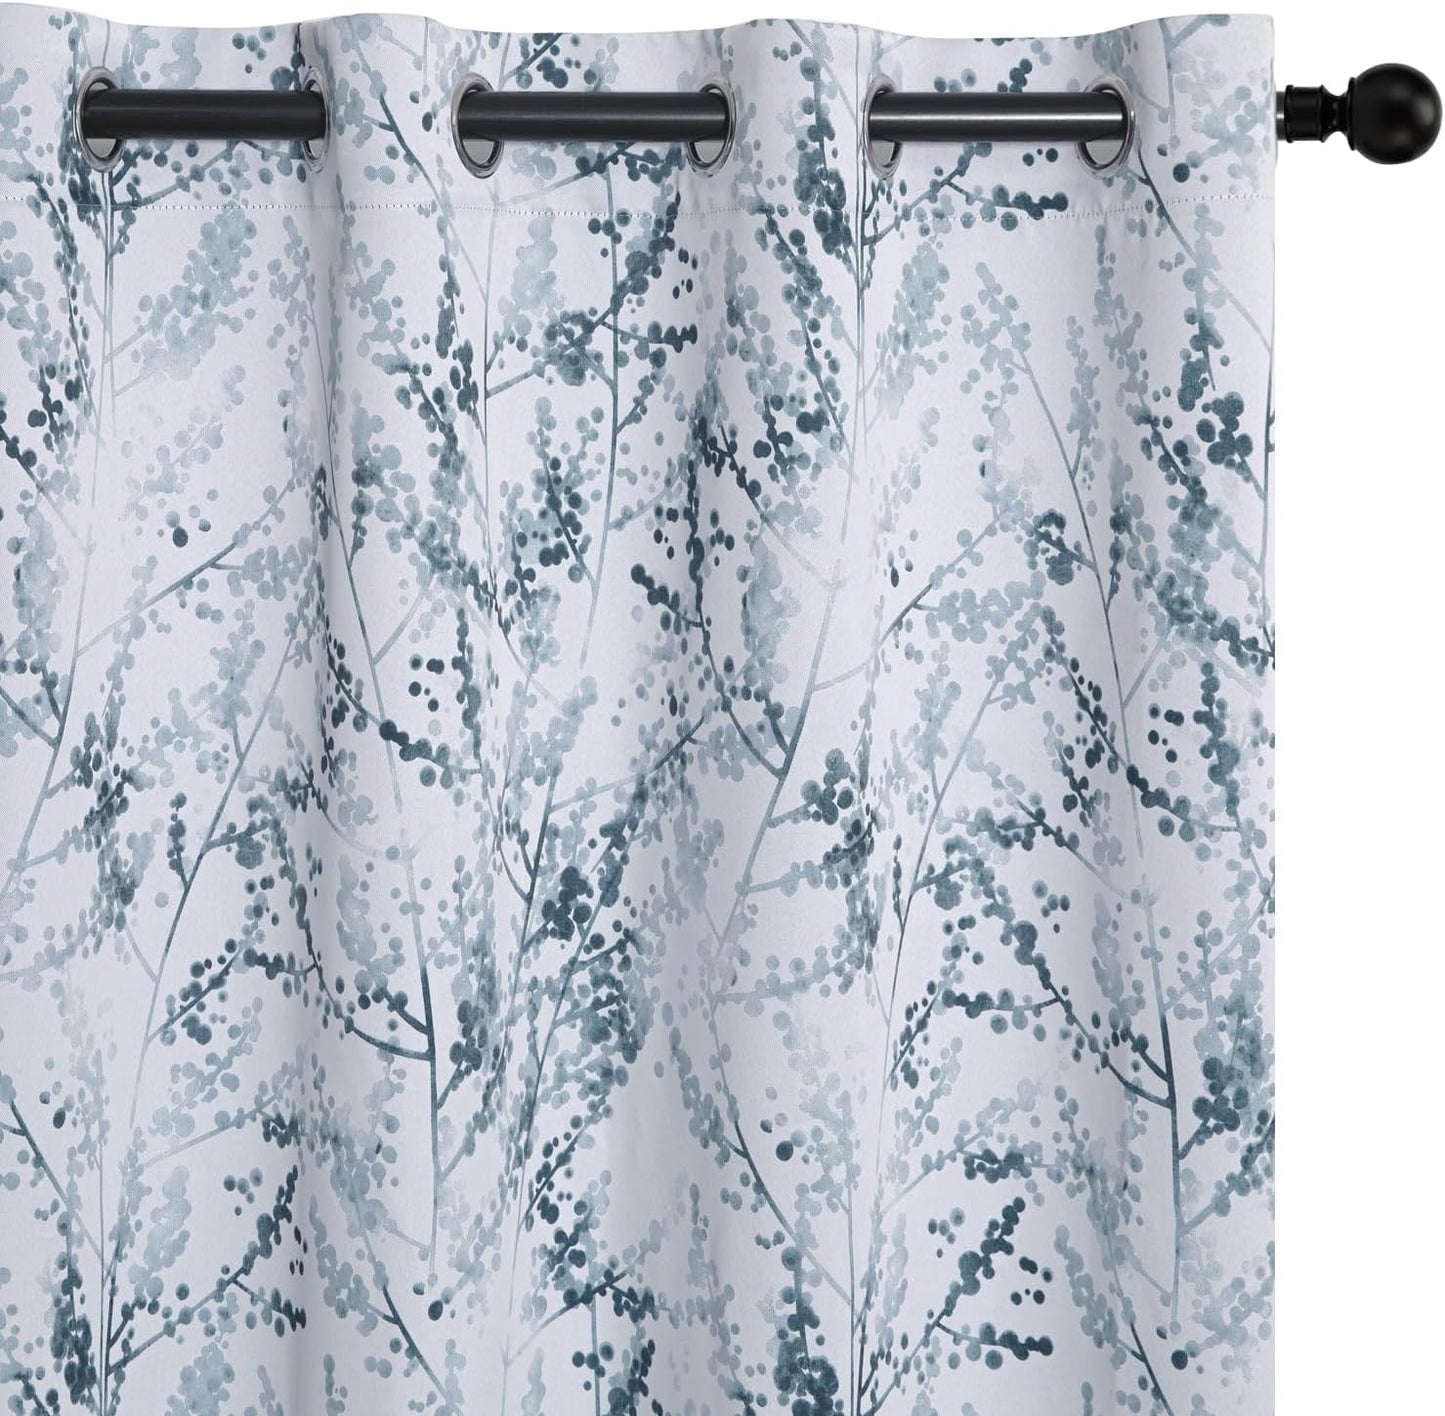 MYSKY HOME Curtains for Bedroom 63 Inches Long Thermal Insulated Room Darkening Curtains Tree Branch Print Pattern Classic Curtains for Dining Room Home Decor Grommet Top Drapes, Sage, 2 Pieces  MYSKY HOME Branch-Navy Blue 52"W X 84"L 